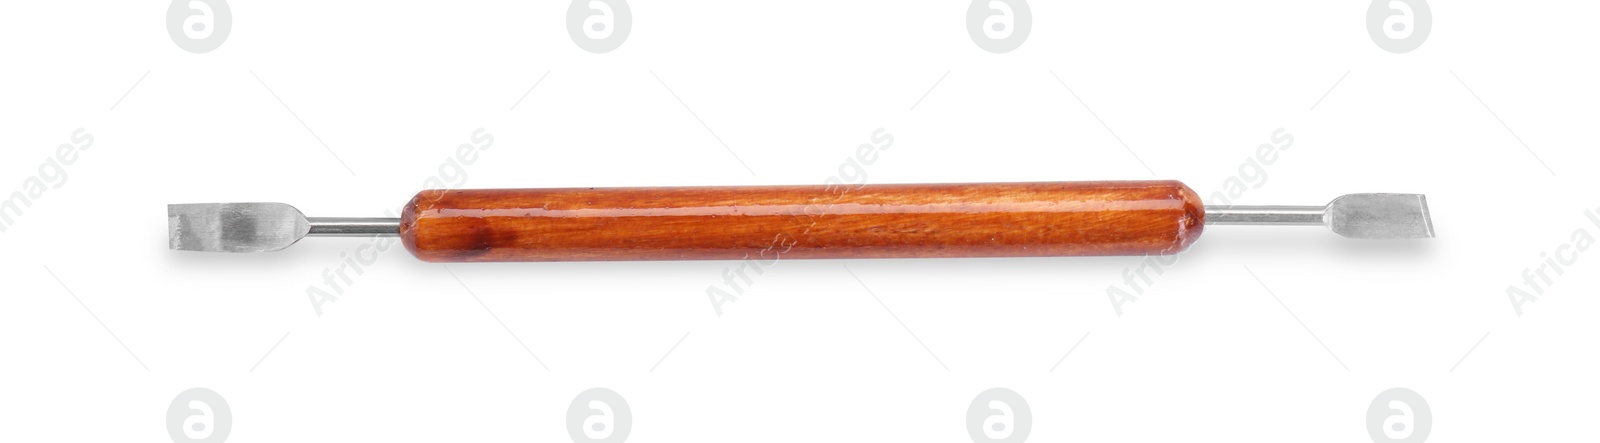 Photo of One clay crafting tool isolated on white, top view